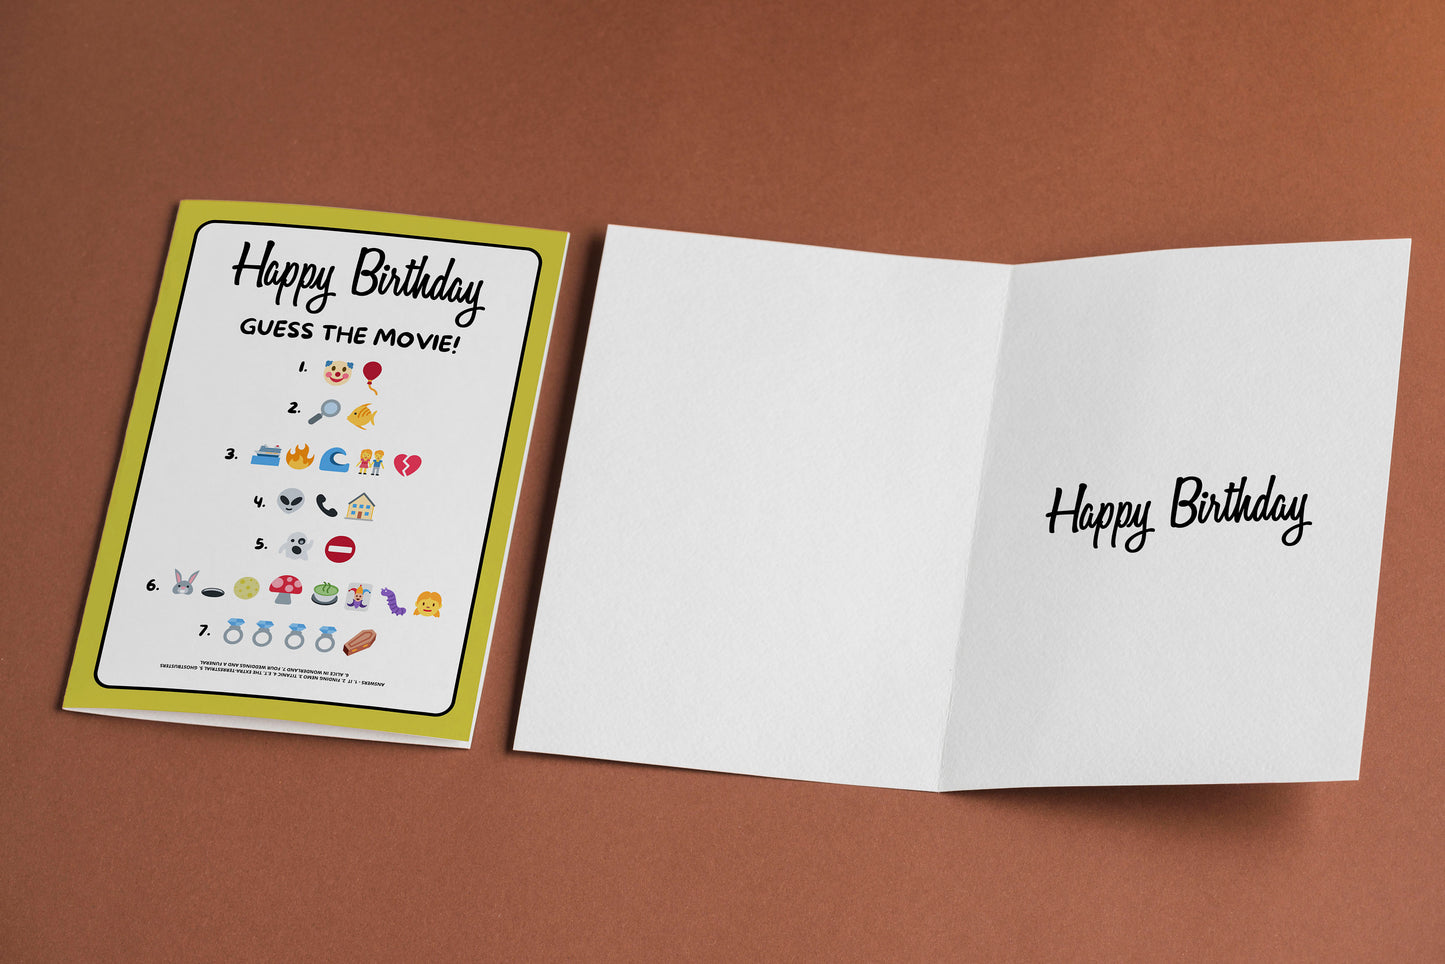 Unique Birthday Card For Movie Fan, Guess The Movie Birthday Card, Movie Quiz Card, Happy Birthday, Birthday Card, Card for Movie Fan